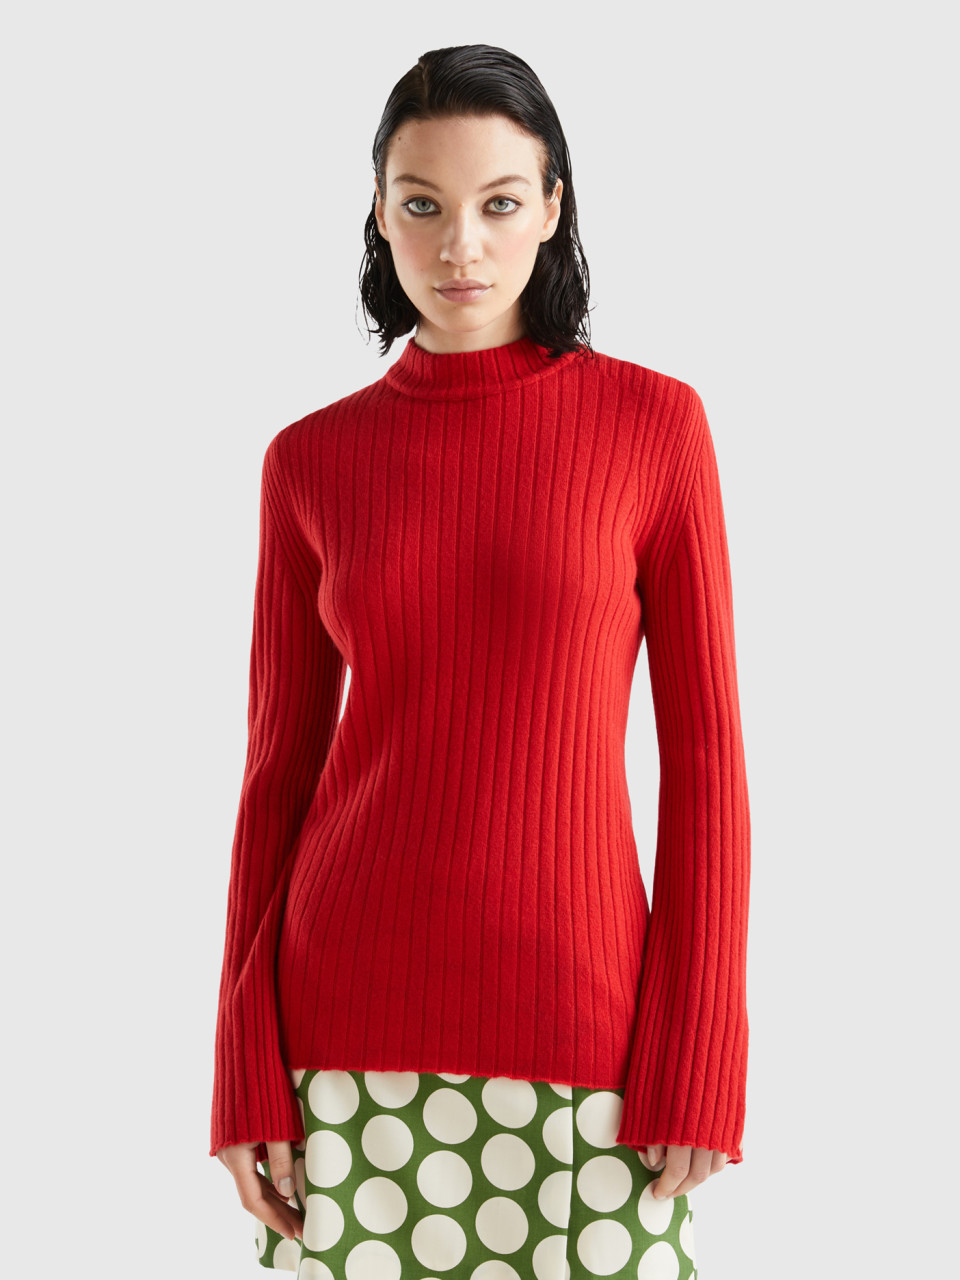 Benetton, Turtleneck Sweater With Slits, Red, Women